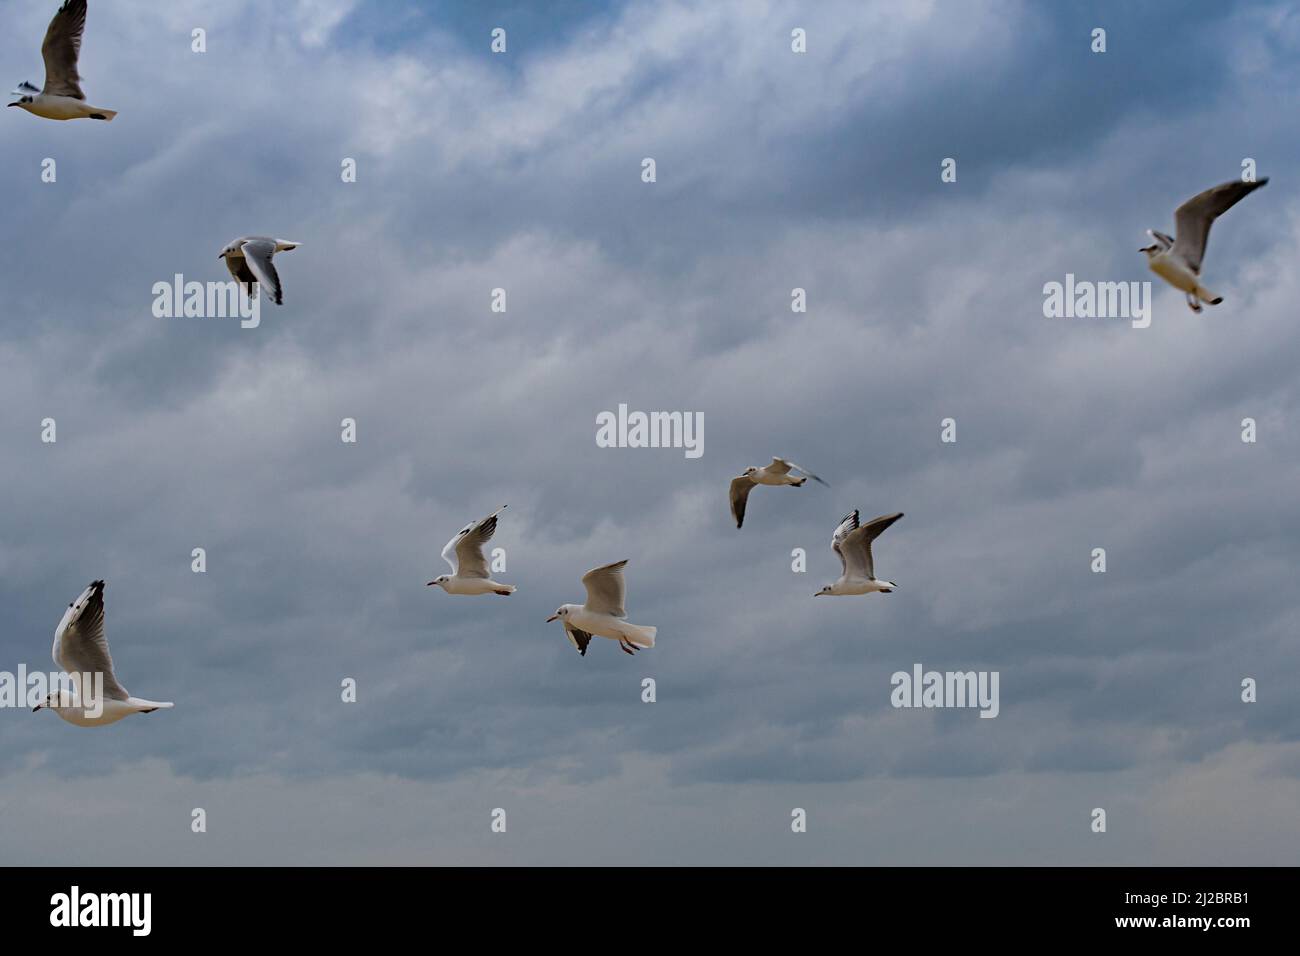 Seagull flying in sky. A flock of seagulls soaring in the blue sky. Stock Photo